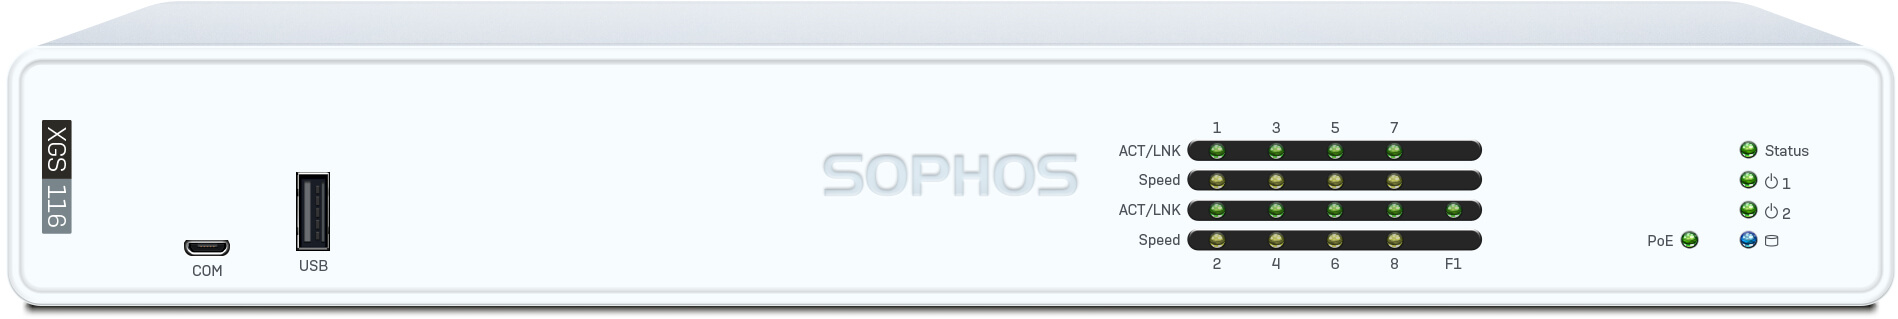 Sophos XGS 116 mit Standard Protection